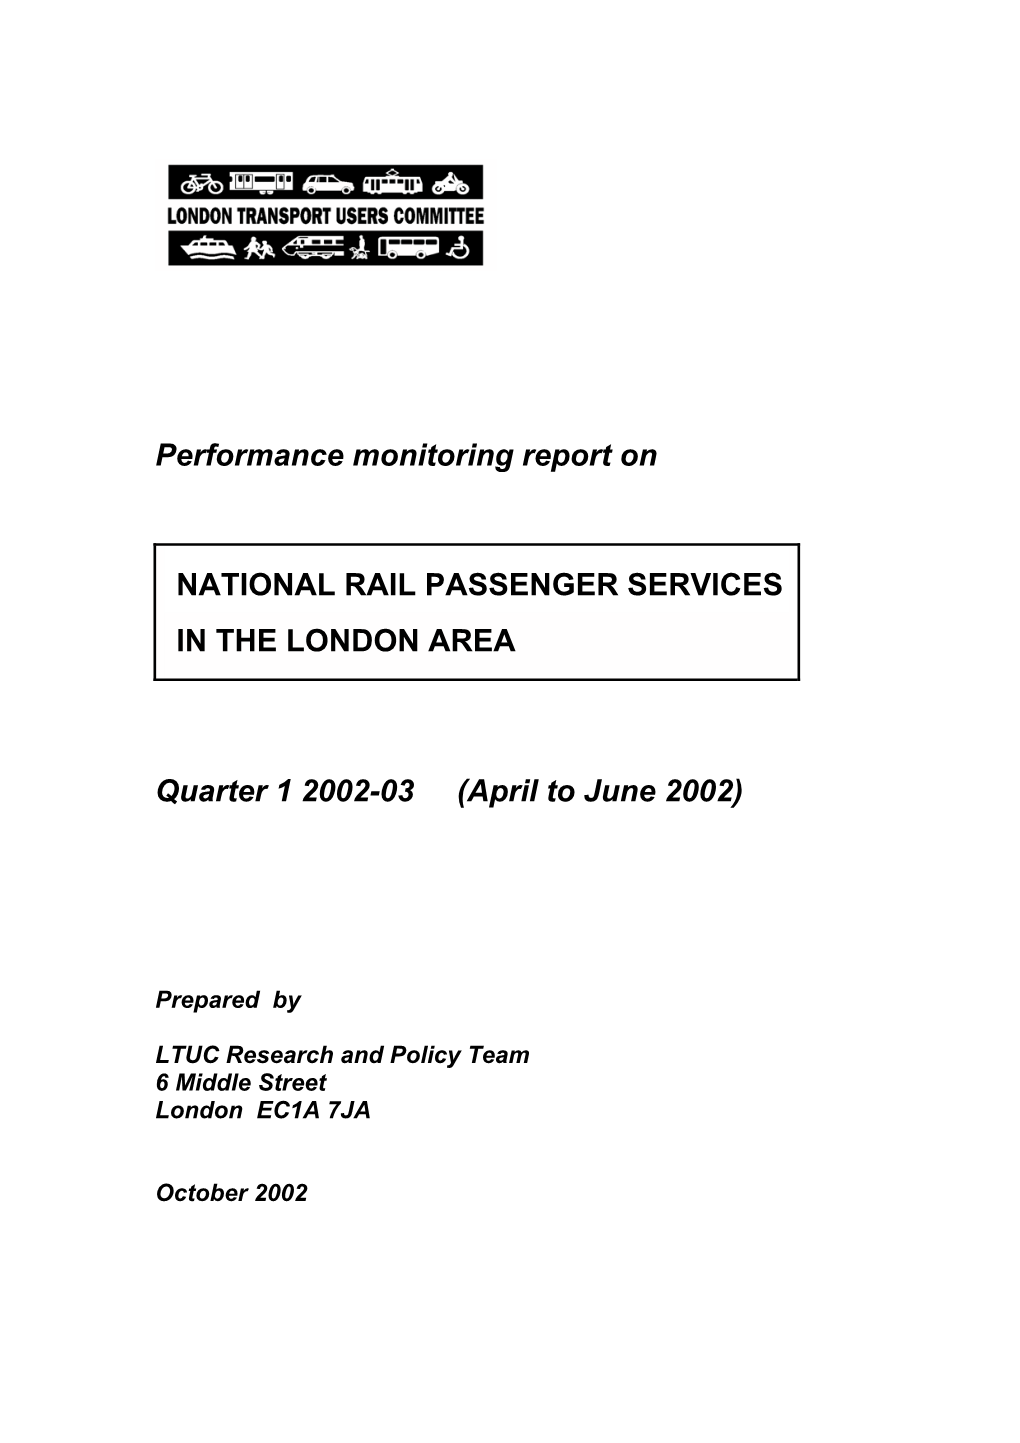 Performance Monitoring Report on NATIONAL RAIL